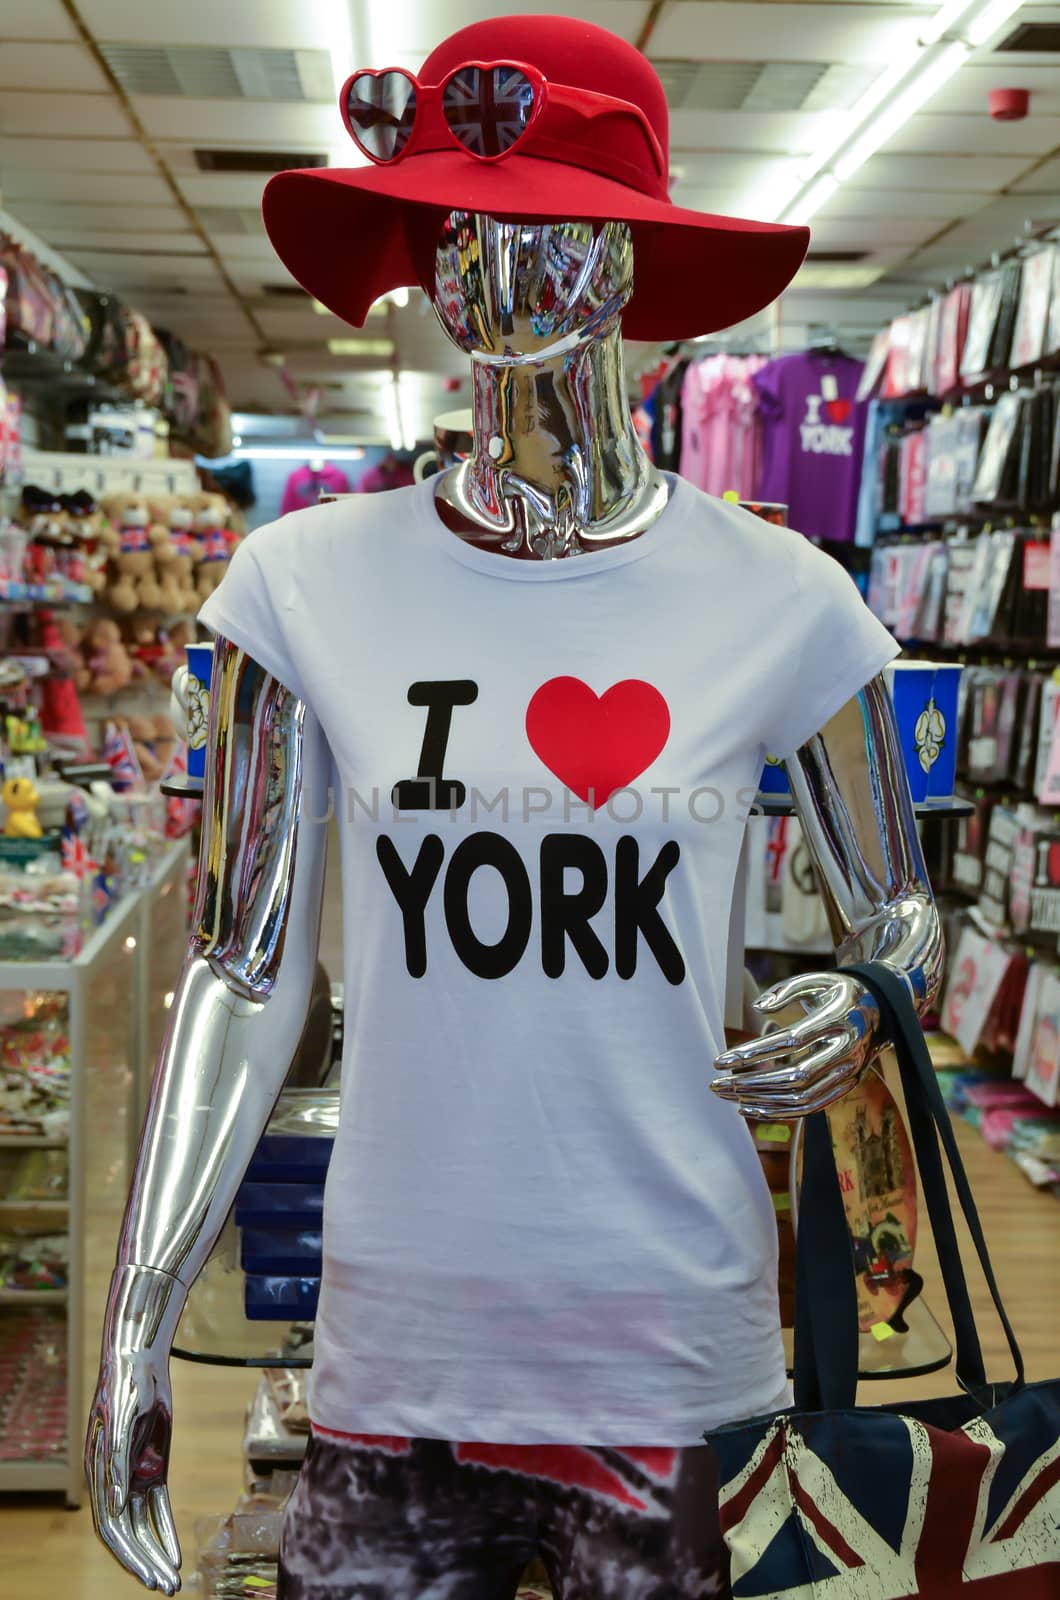 The clothes dummy, mannequin in souvenir shop in York UK